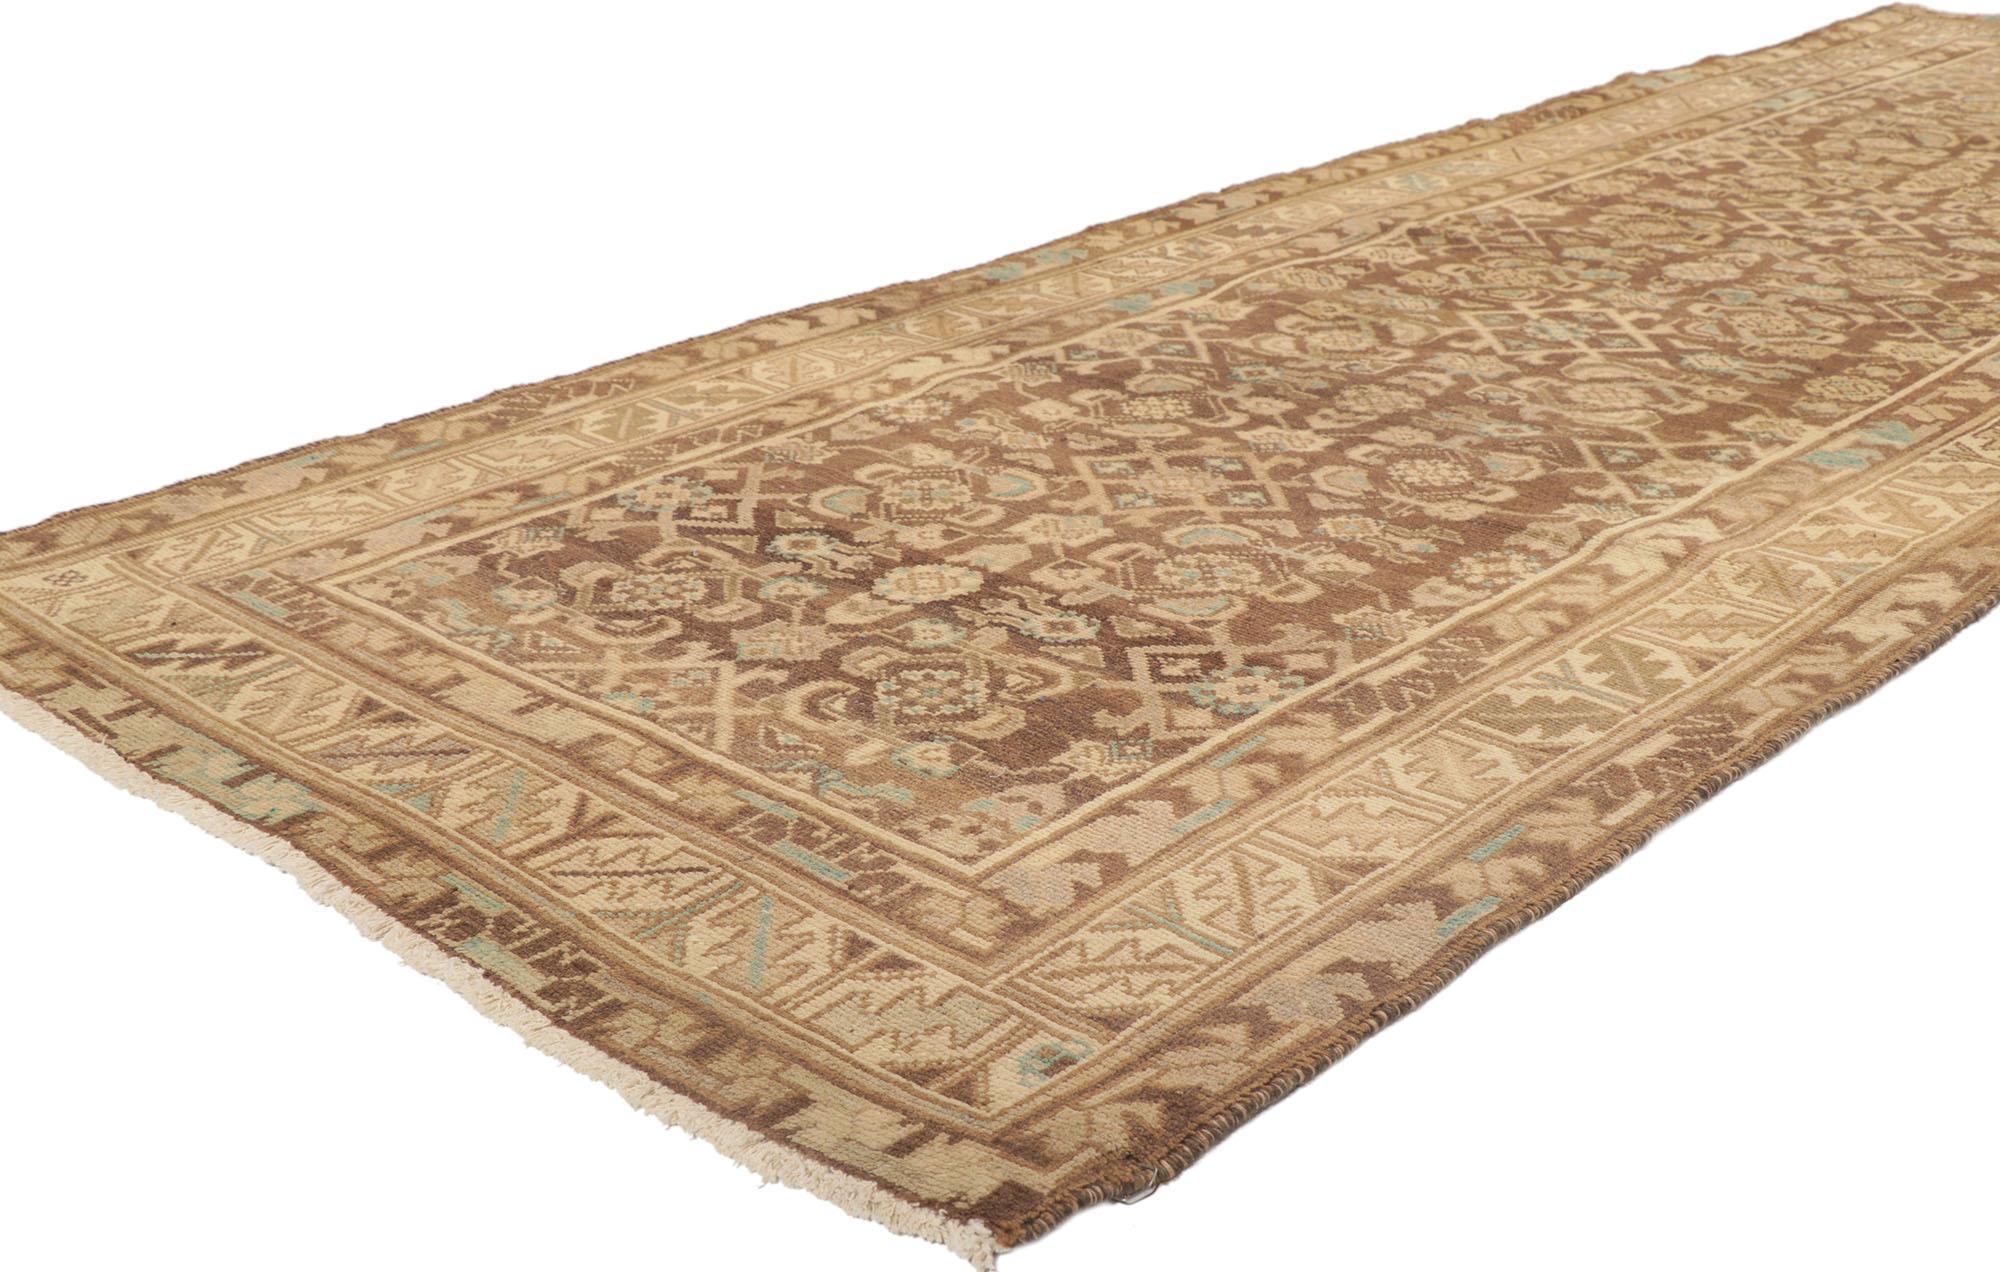 53740 Antique Persian Malayer runner, 03'05 x 09'07. The abrashed brown field features a small-scale Herati pattern spread across the composition. The Classic Herati design, also known as the Mahi or Fish pattern, is amongst the most widespread and